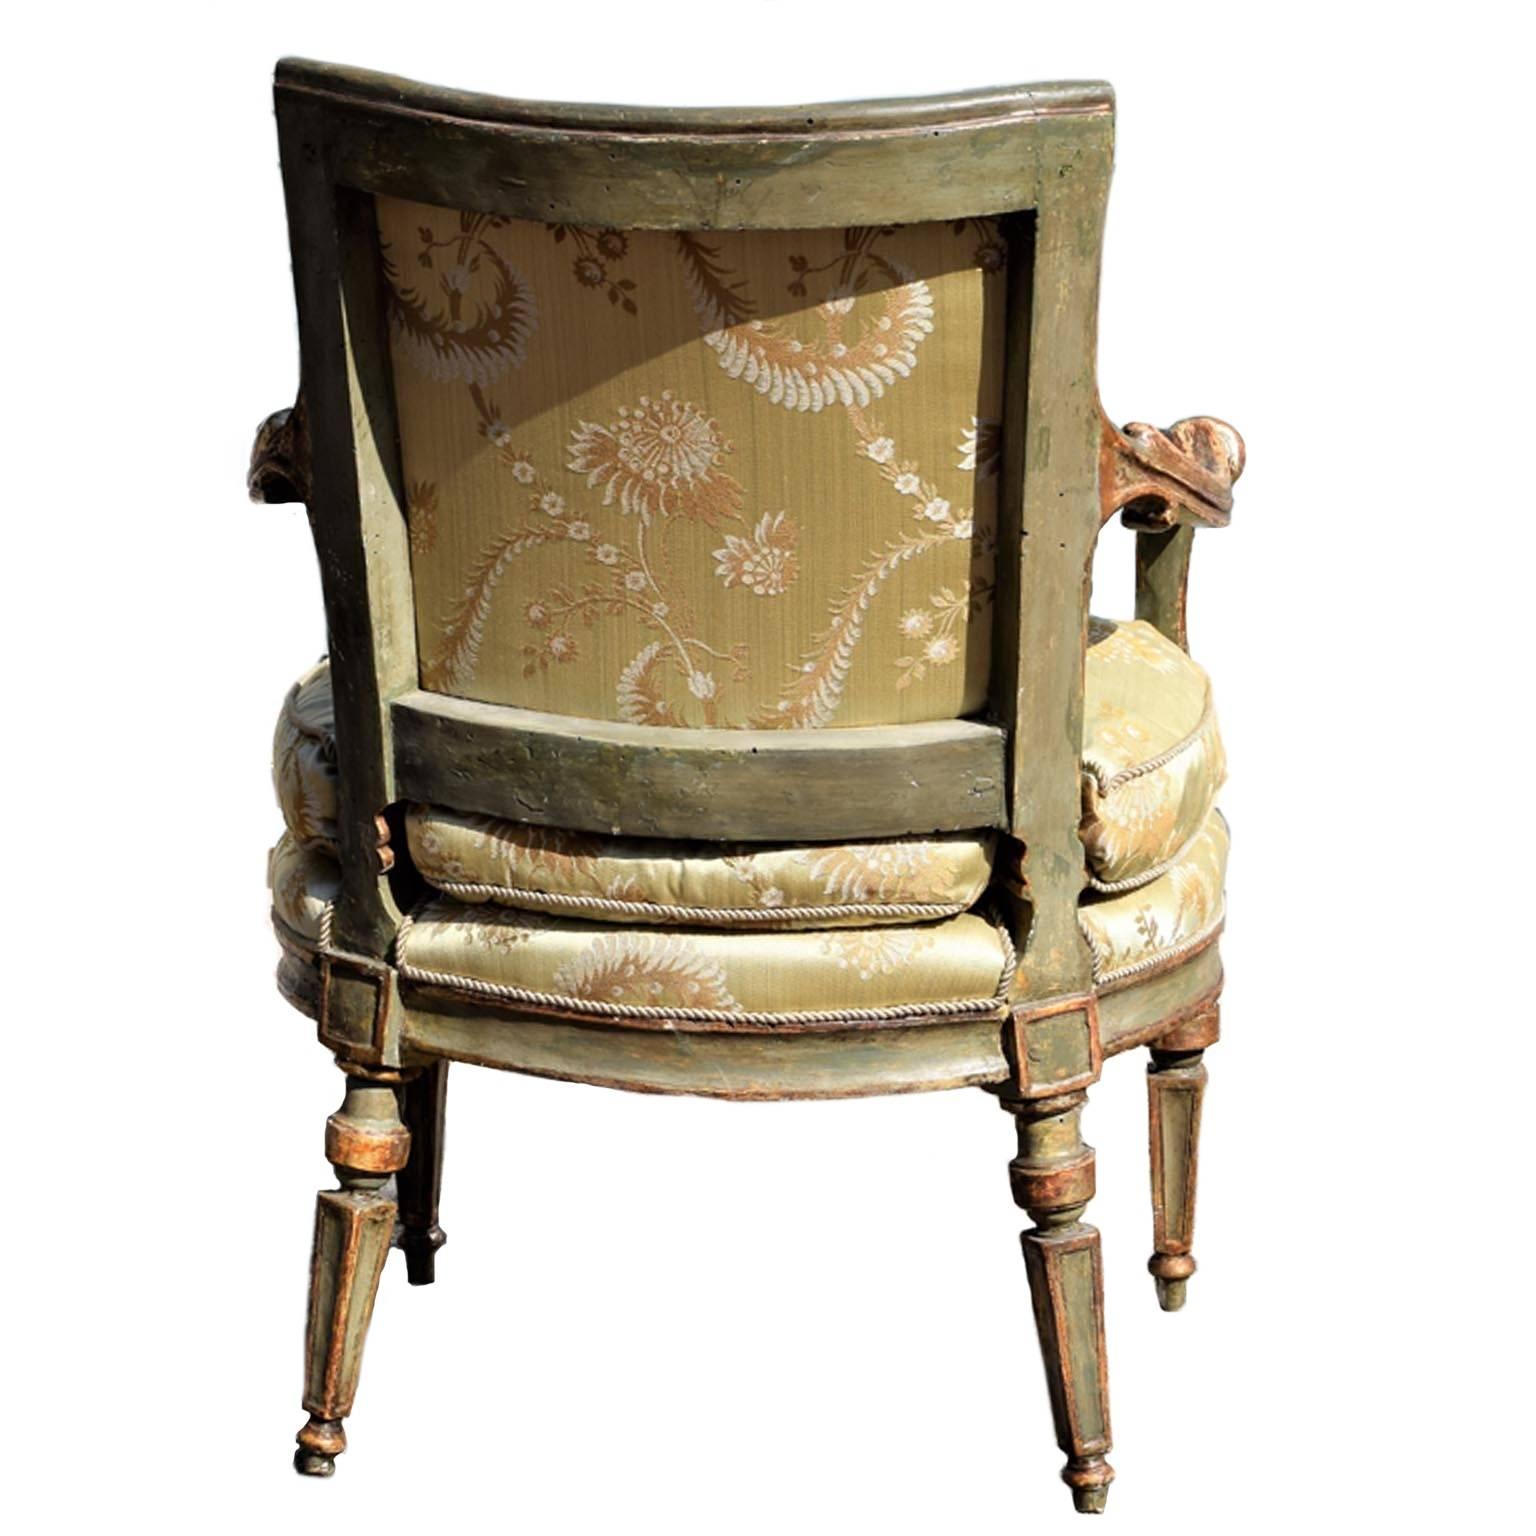 Grand Tour 18th Century Venetian Neoclassical Painted and Parcel-Gilt Fauteuil